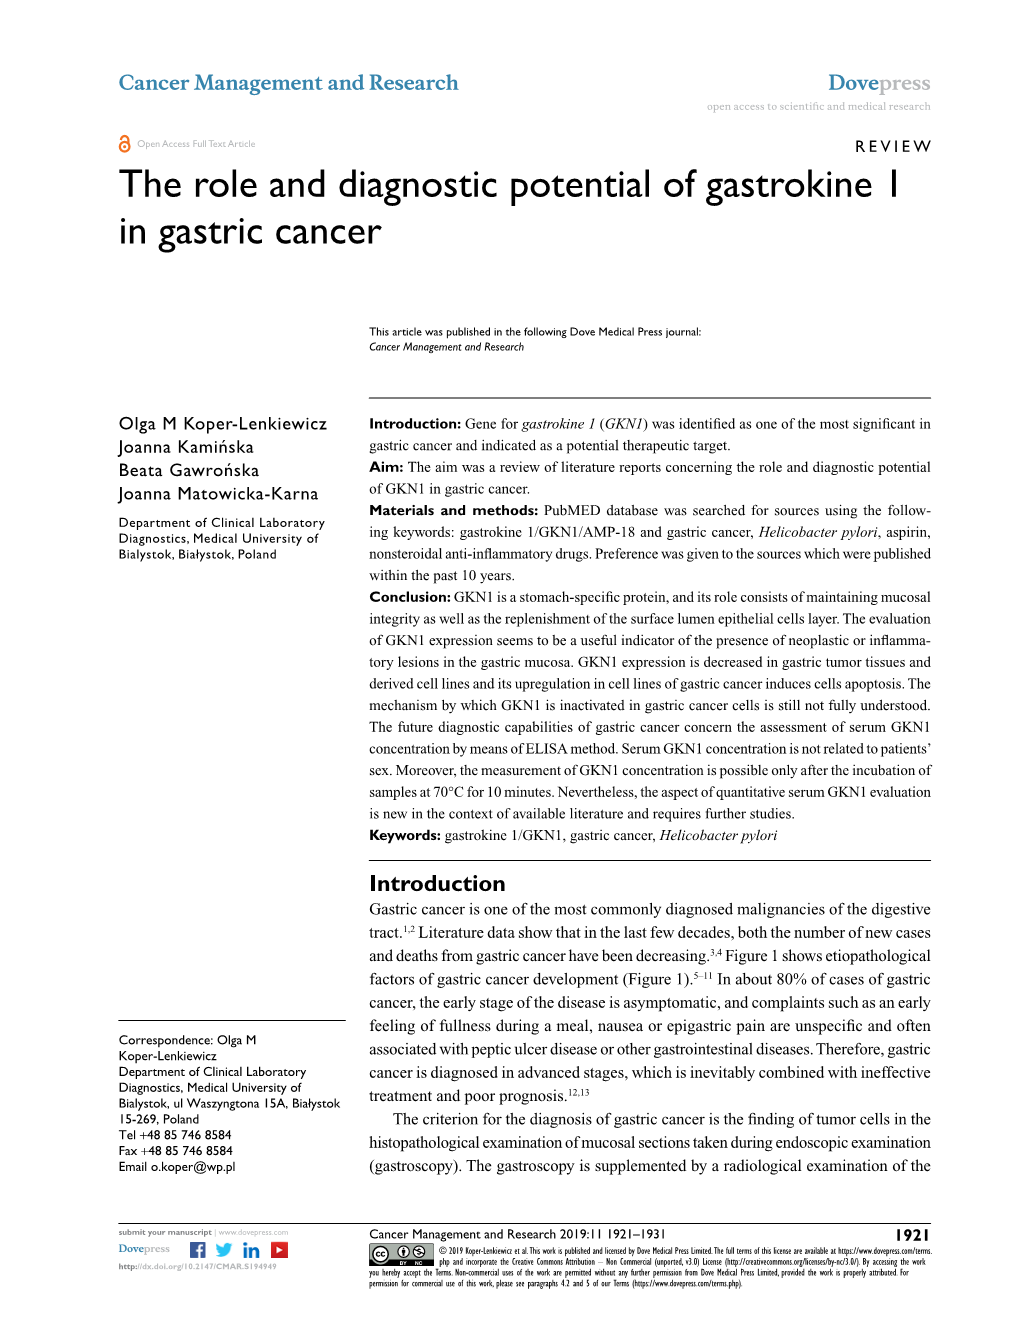 The Role and Diagnostic Potential of Gastrokine 1 in Gastric Cancer